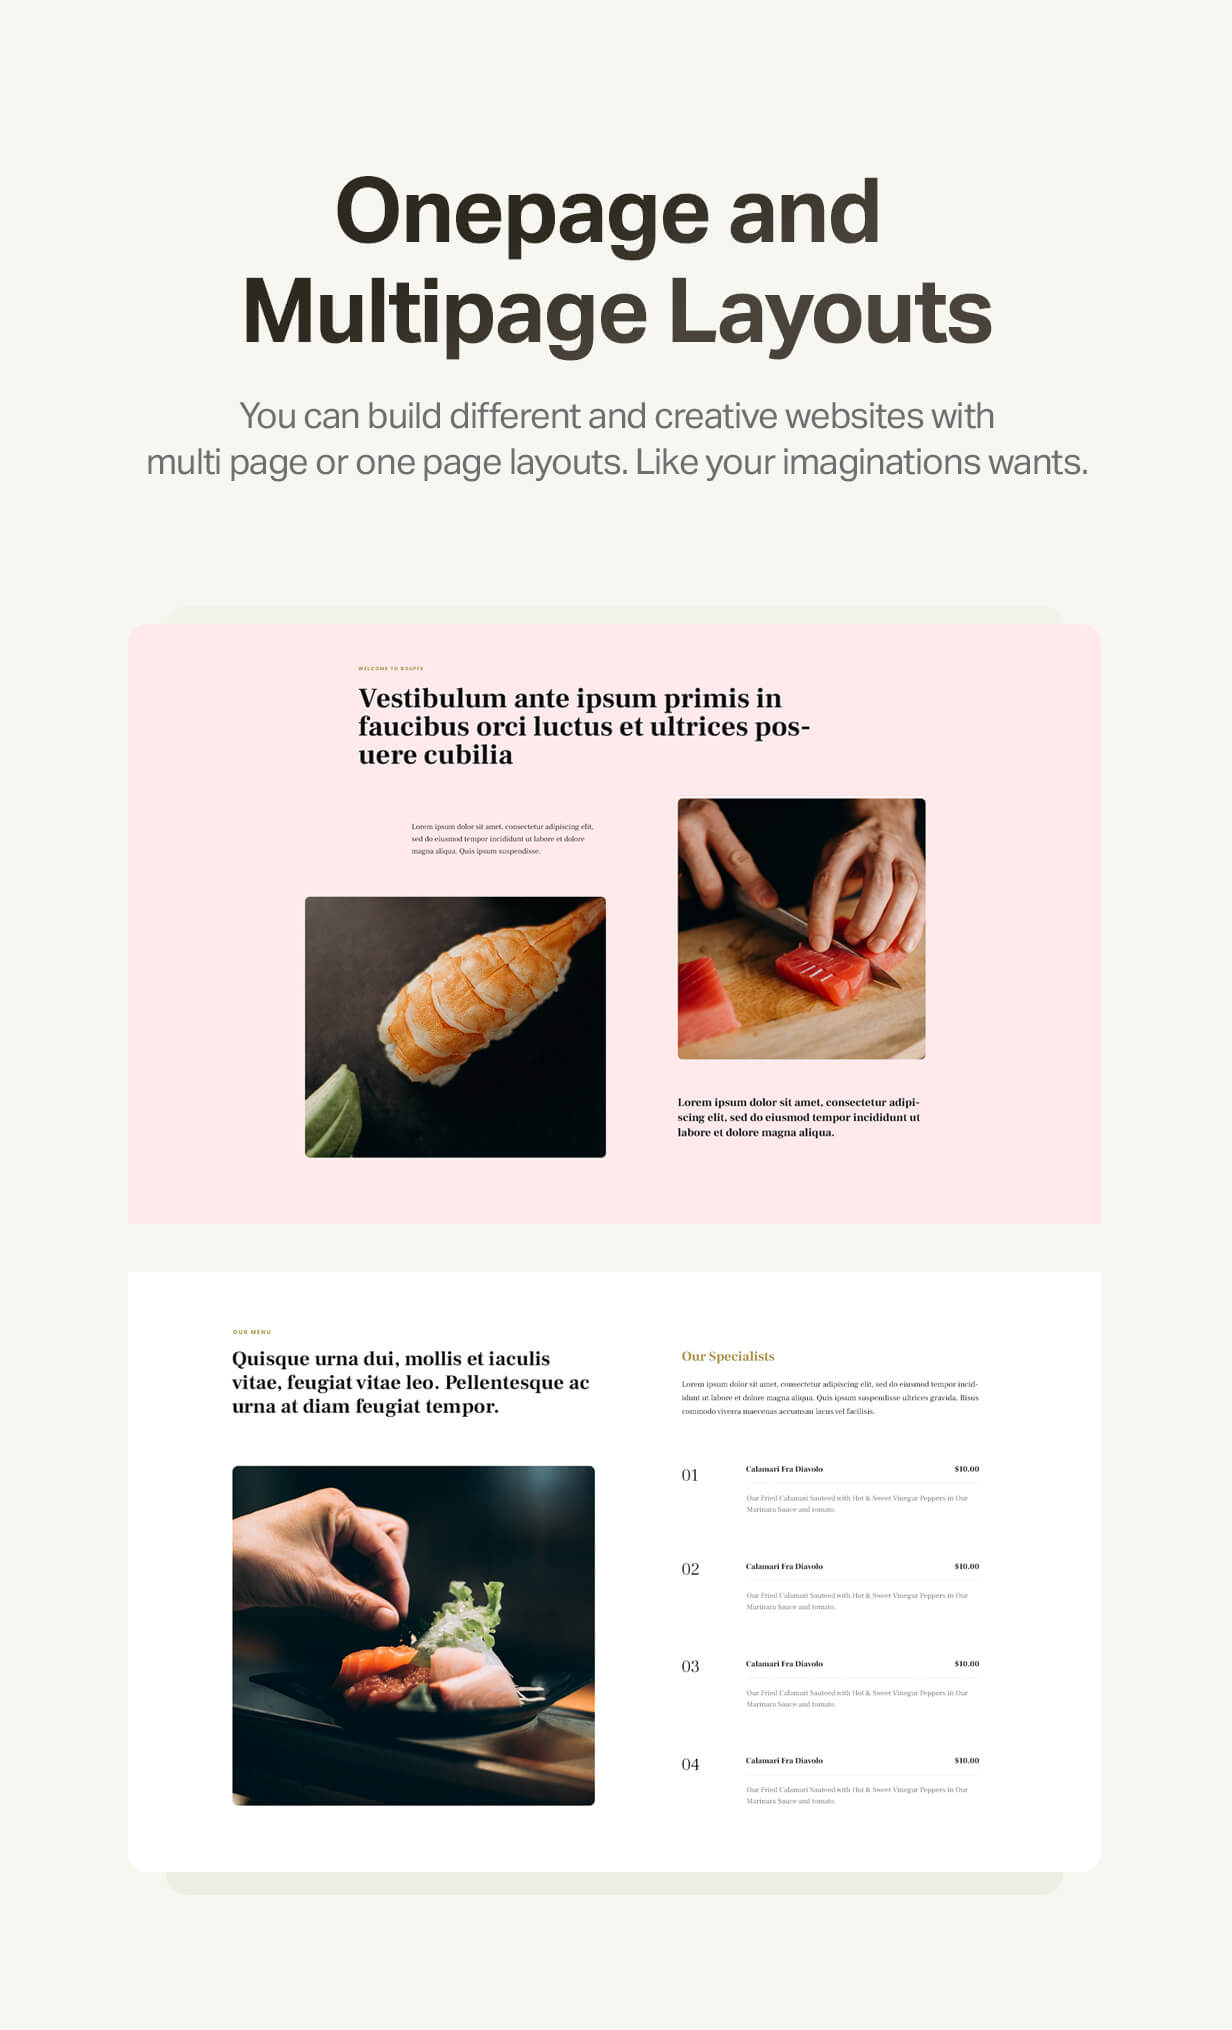 Onepage and multipage